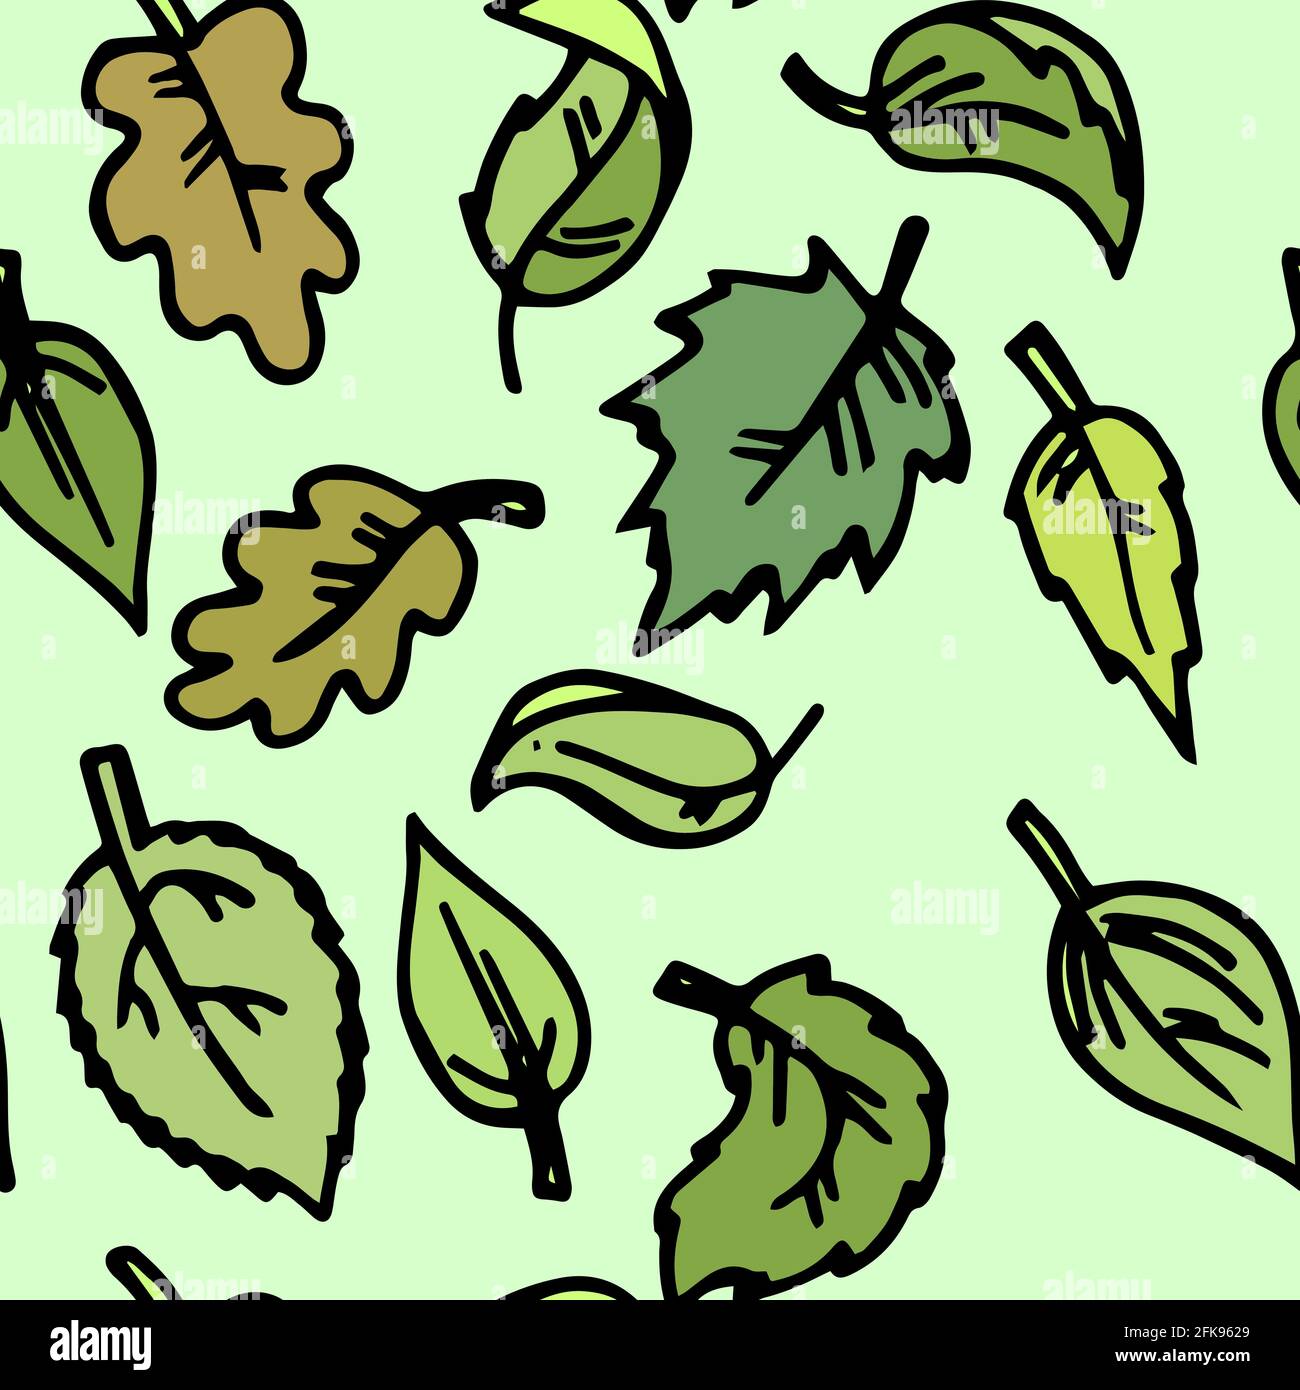 Foliage. Seamless illustration. Cartoon style sketch of leaves. Hand outline drawing funny plants. vector Stock Vector